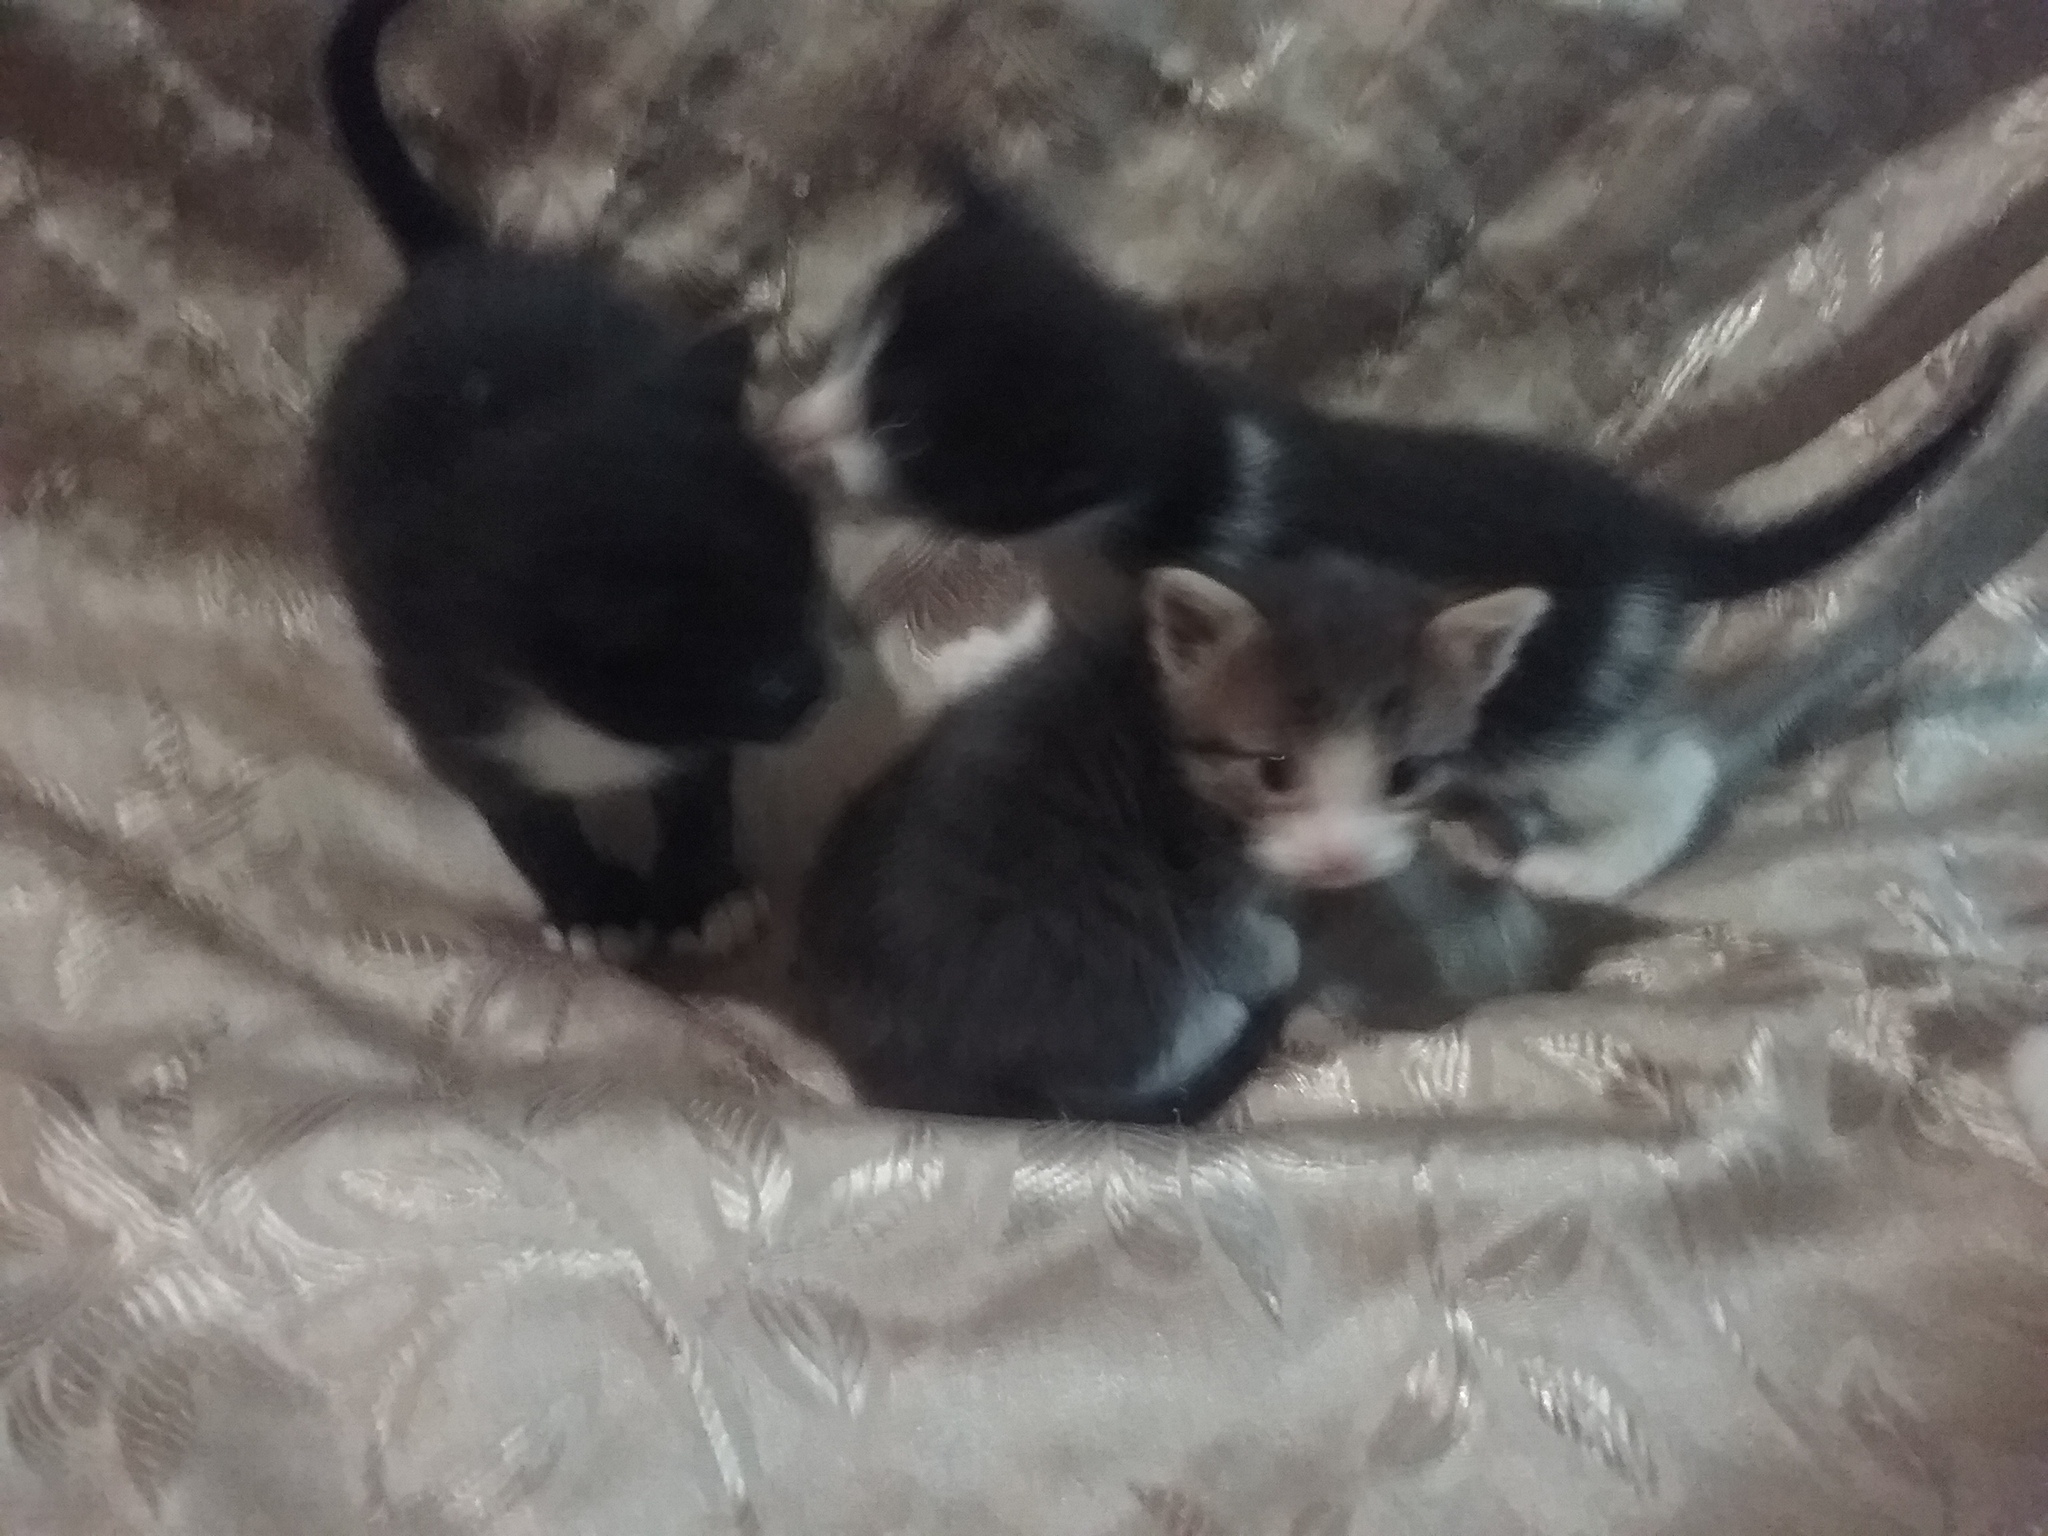 family - My, Help, No rating, cat, Kittens, Longpost, Black cat, In good hands, Shelter, Video